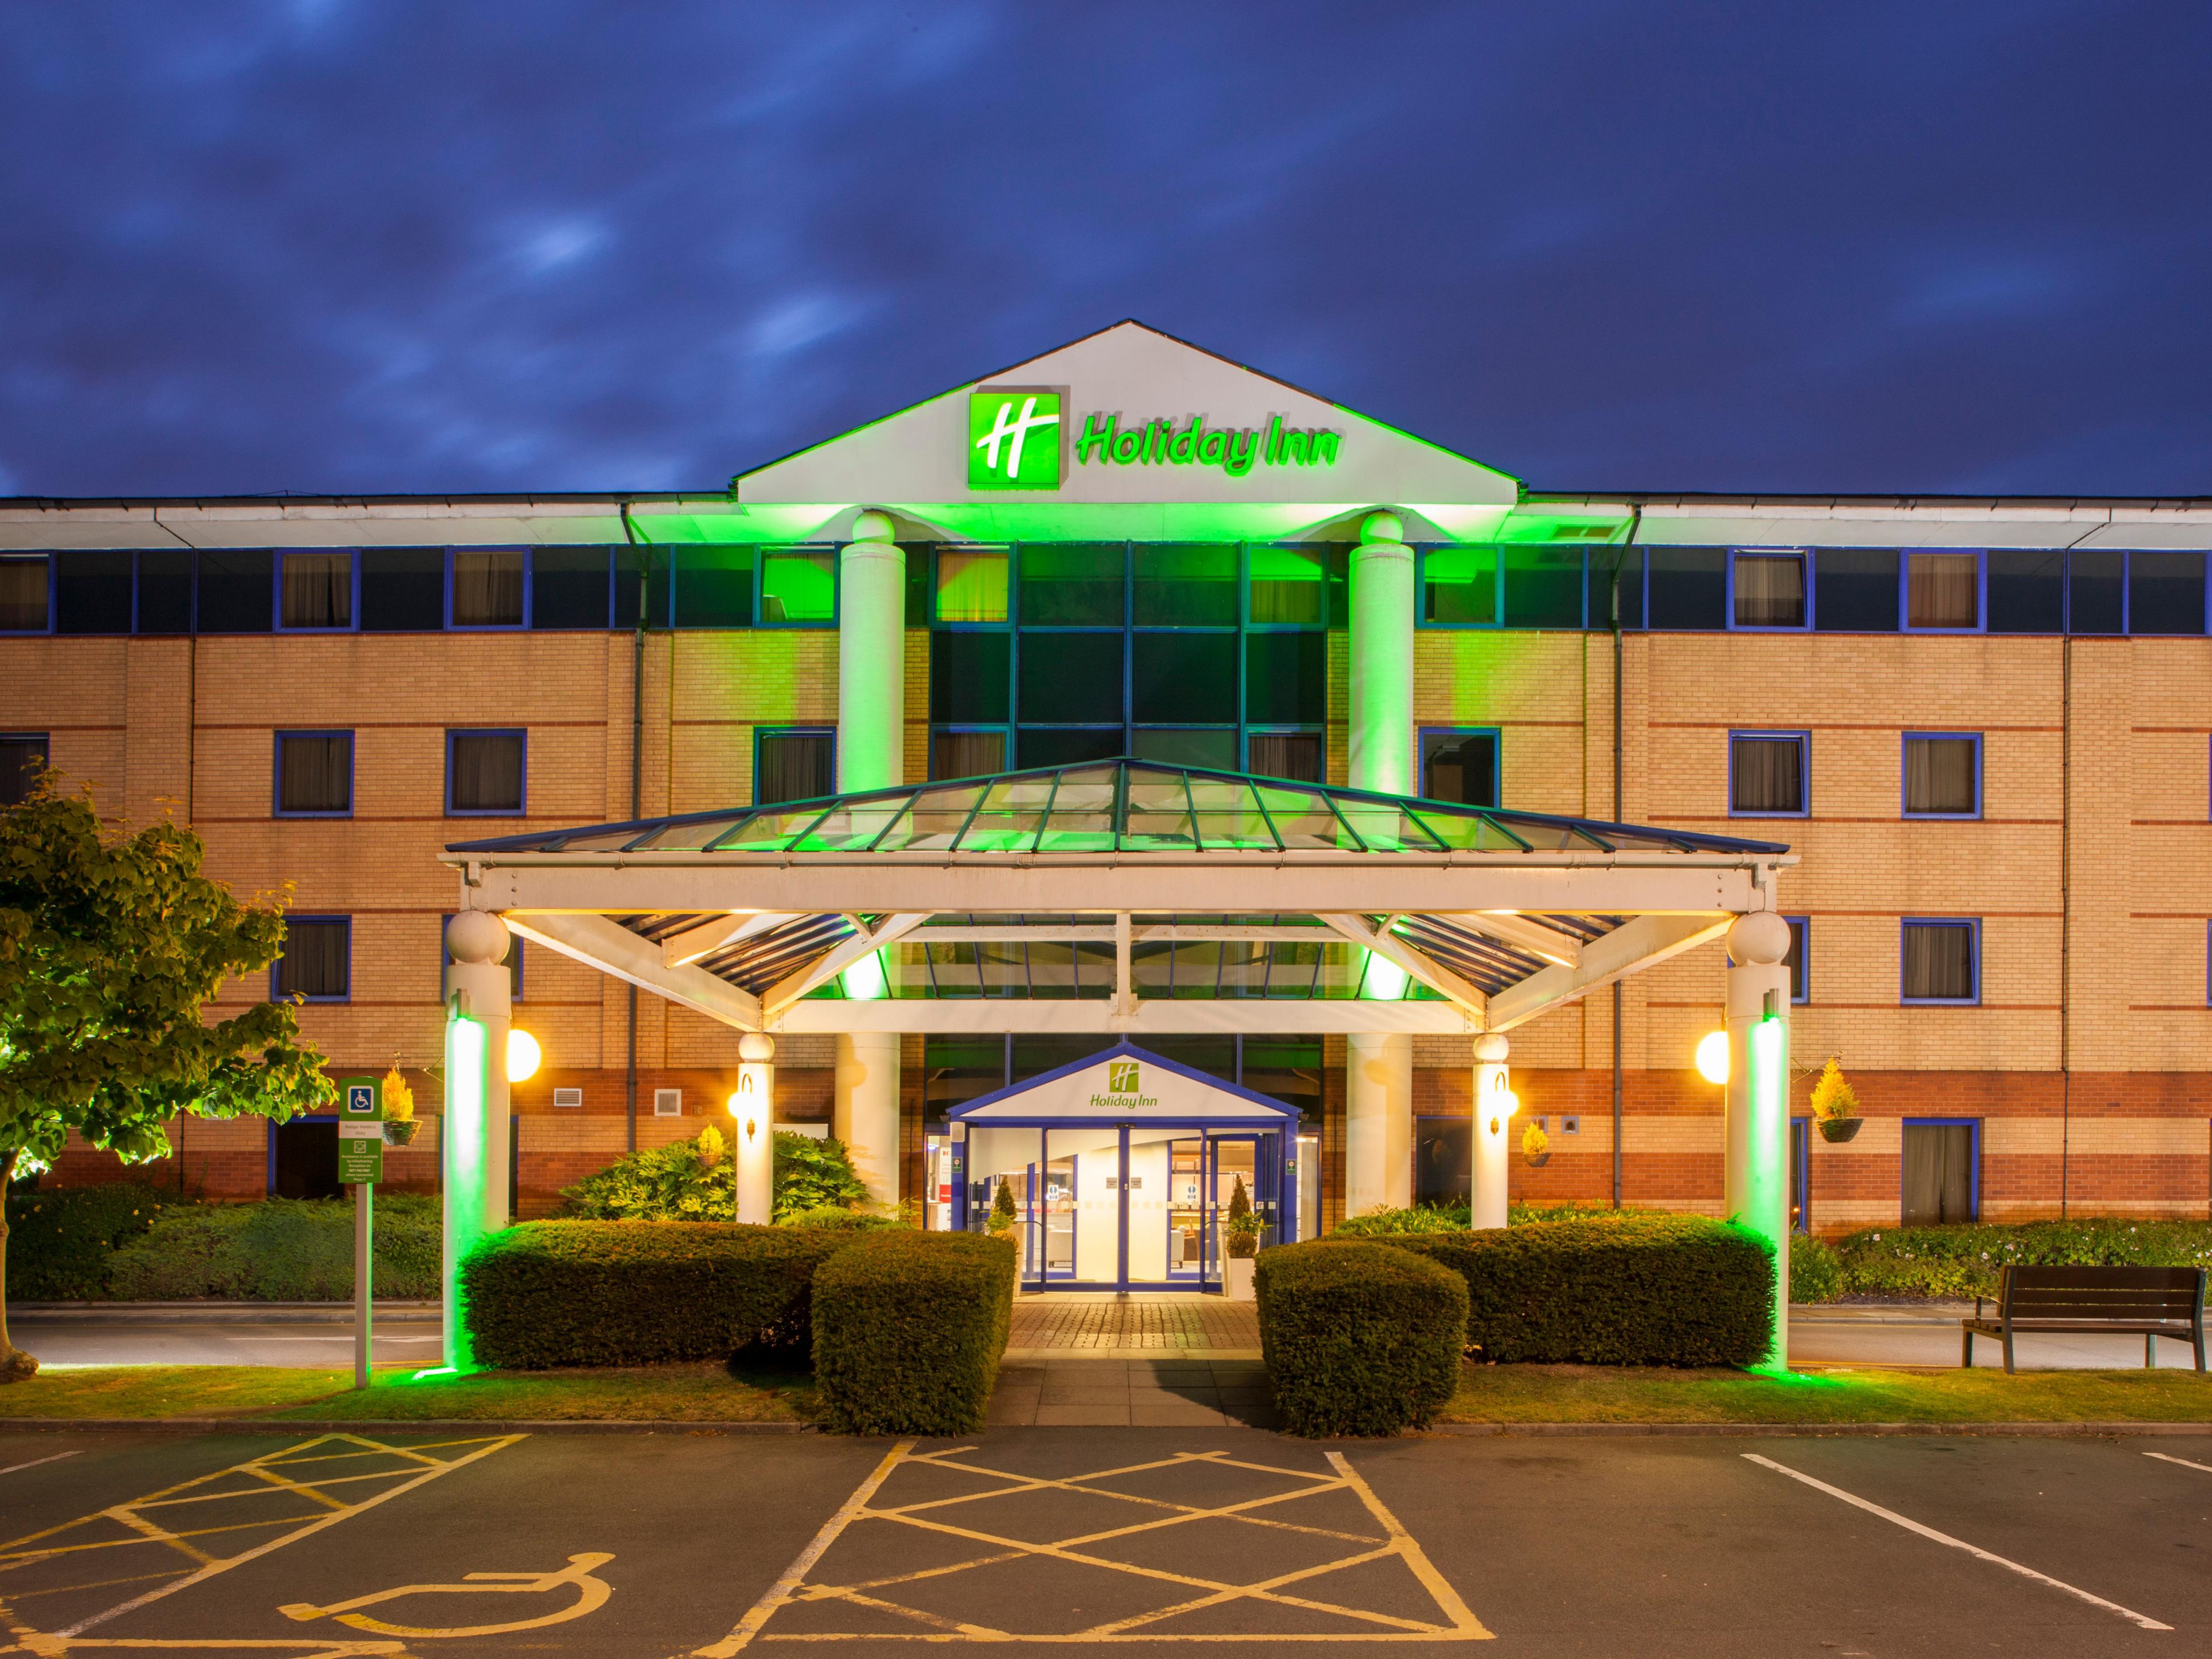 Holiday Inn Warrington - Room Pictures & Amenities